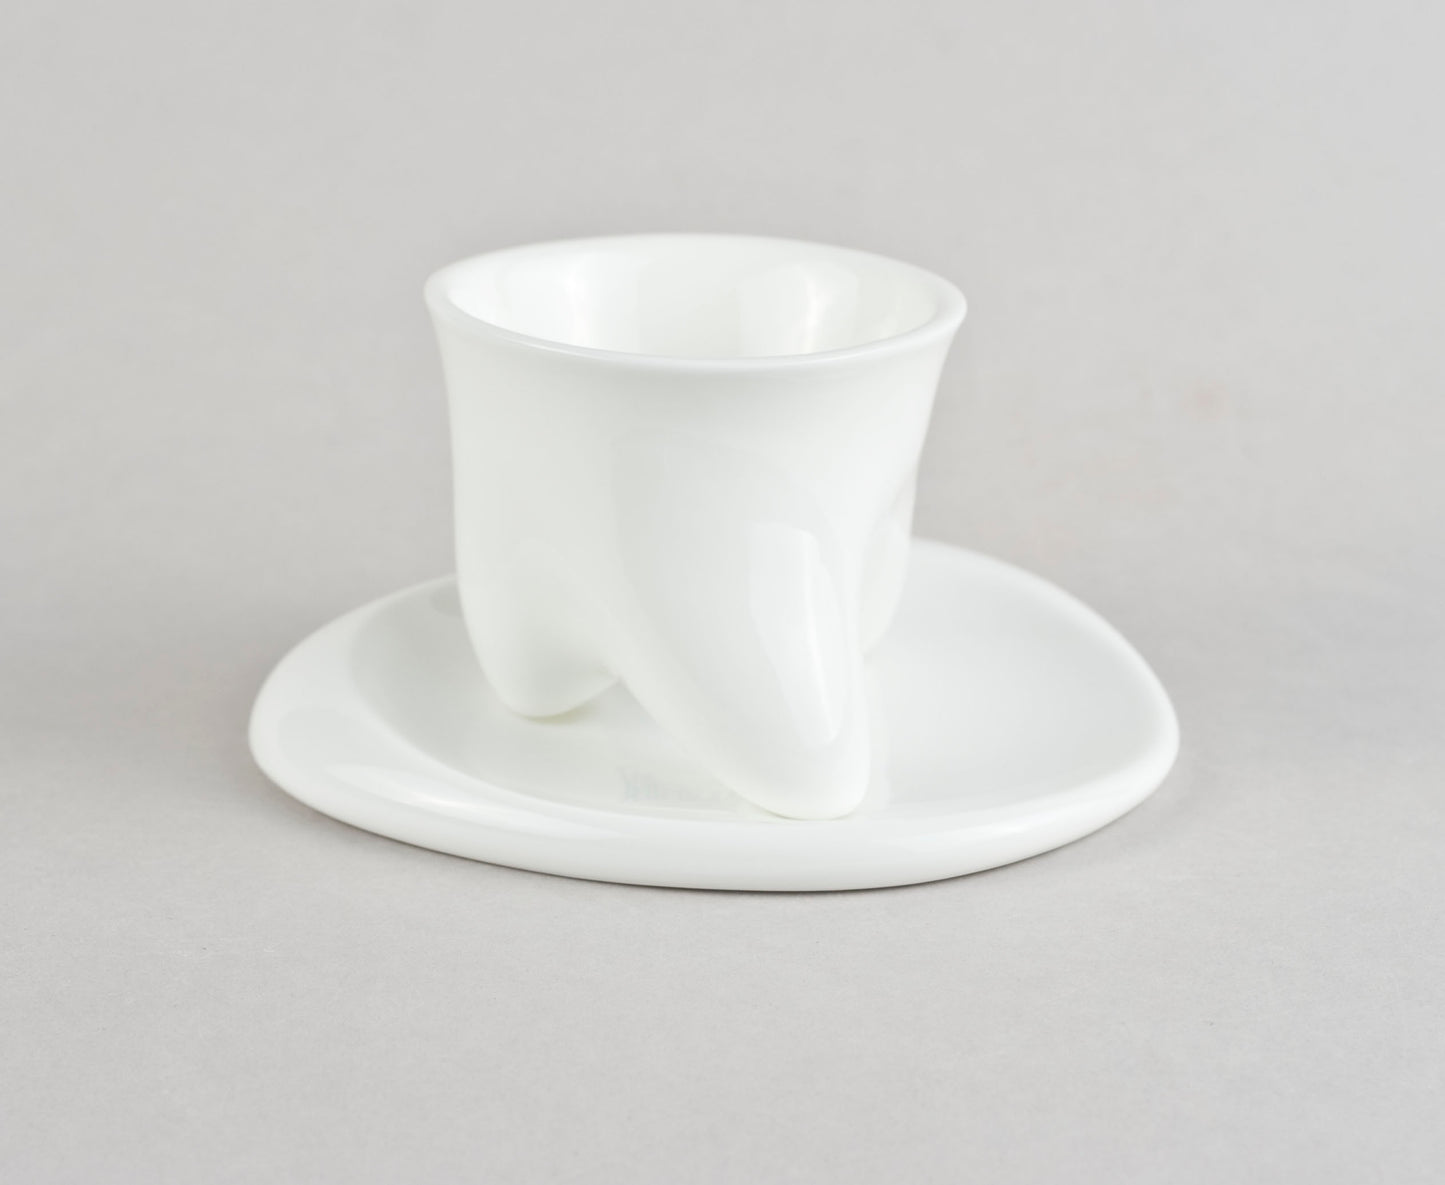 Porcelain Thermo Mug (plate not included)